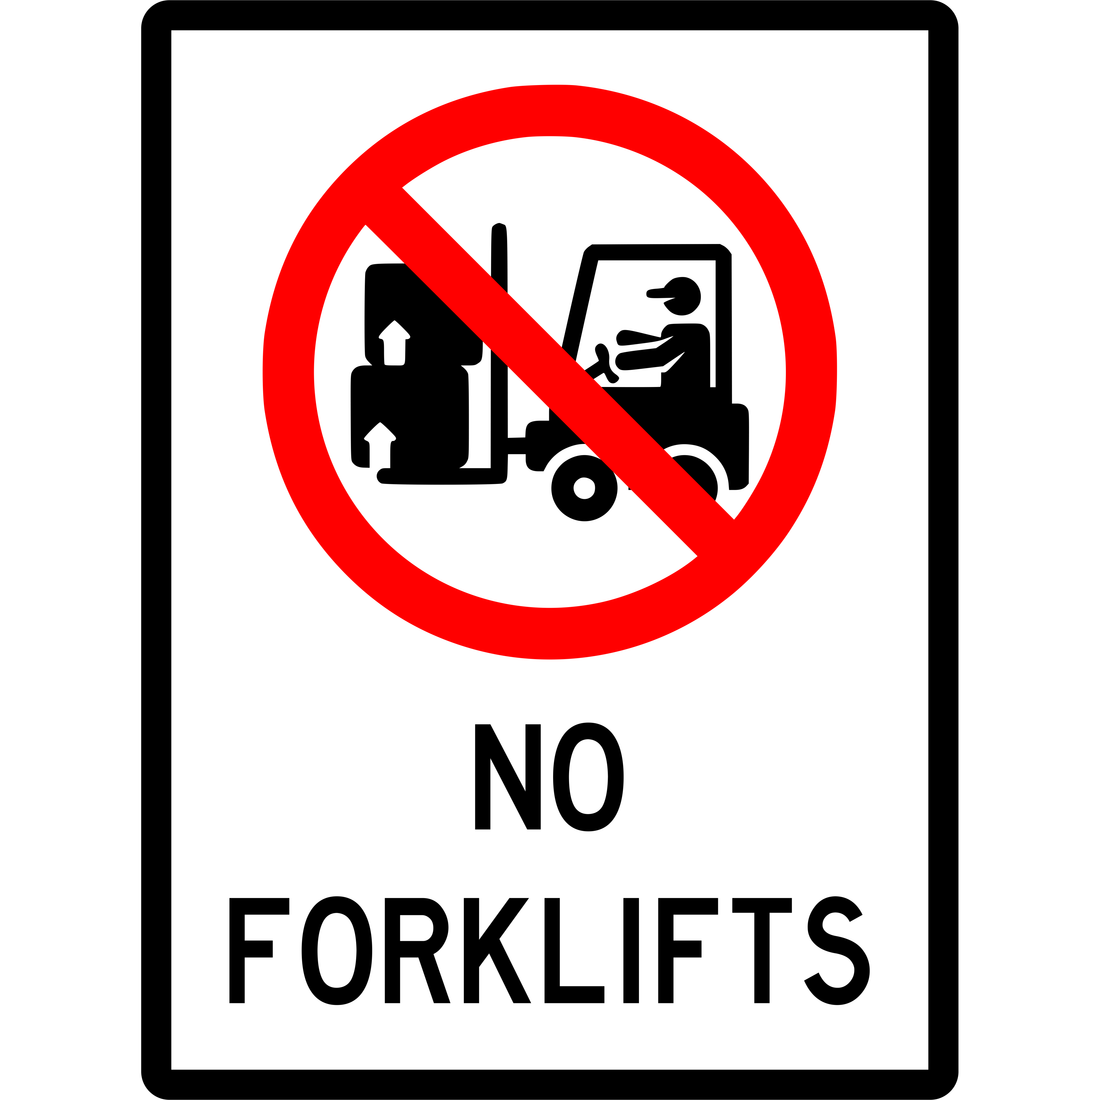 PROHIBITION - NO FORKLIFTS